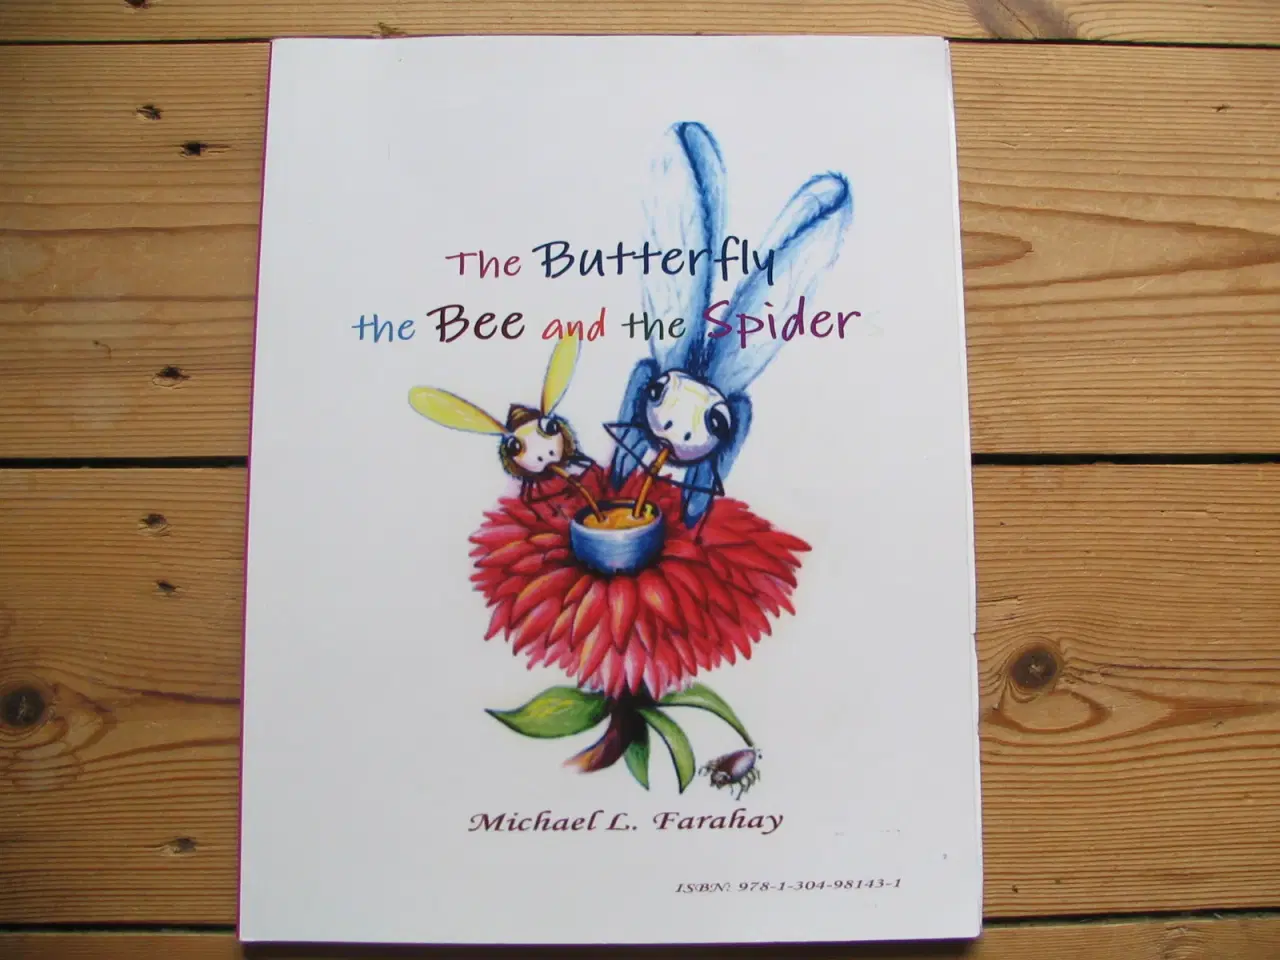 Billede 1 - The Butterfly, the Bee and the Spider